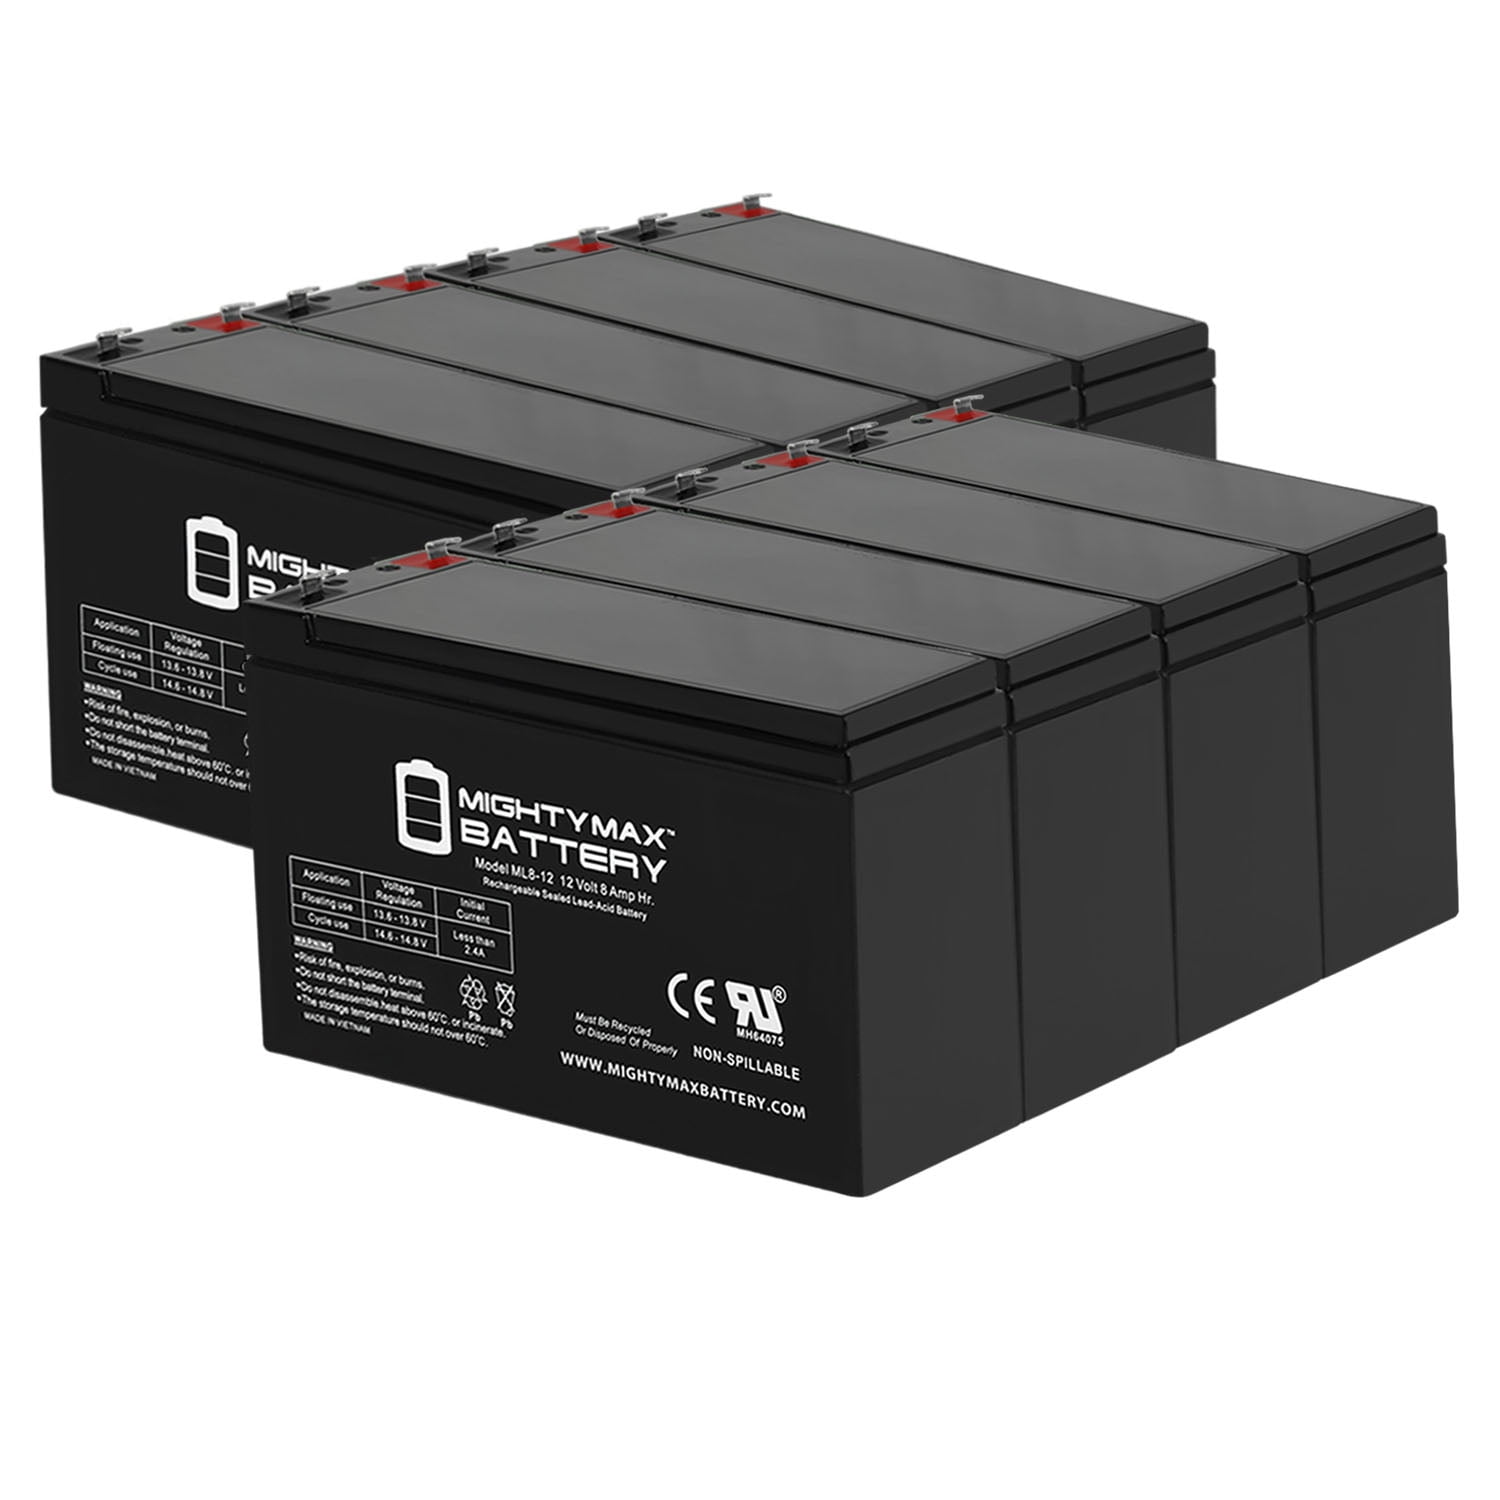 8 Pack Brand Product Mighty Max Battery 12V 7.2AH SLA Battery for Eaton Powerware PW5110 1500 UPS 